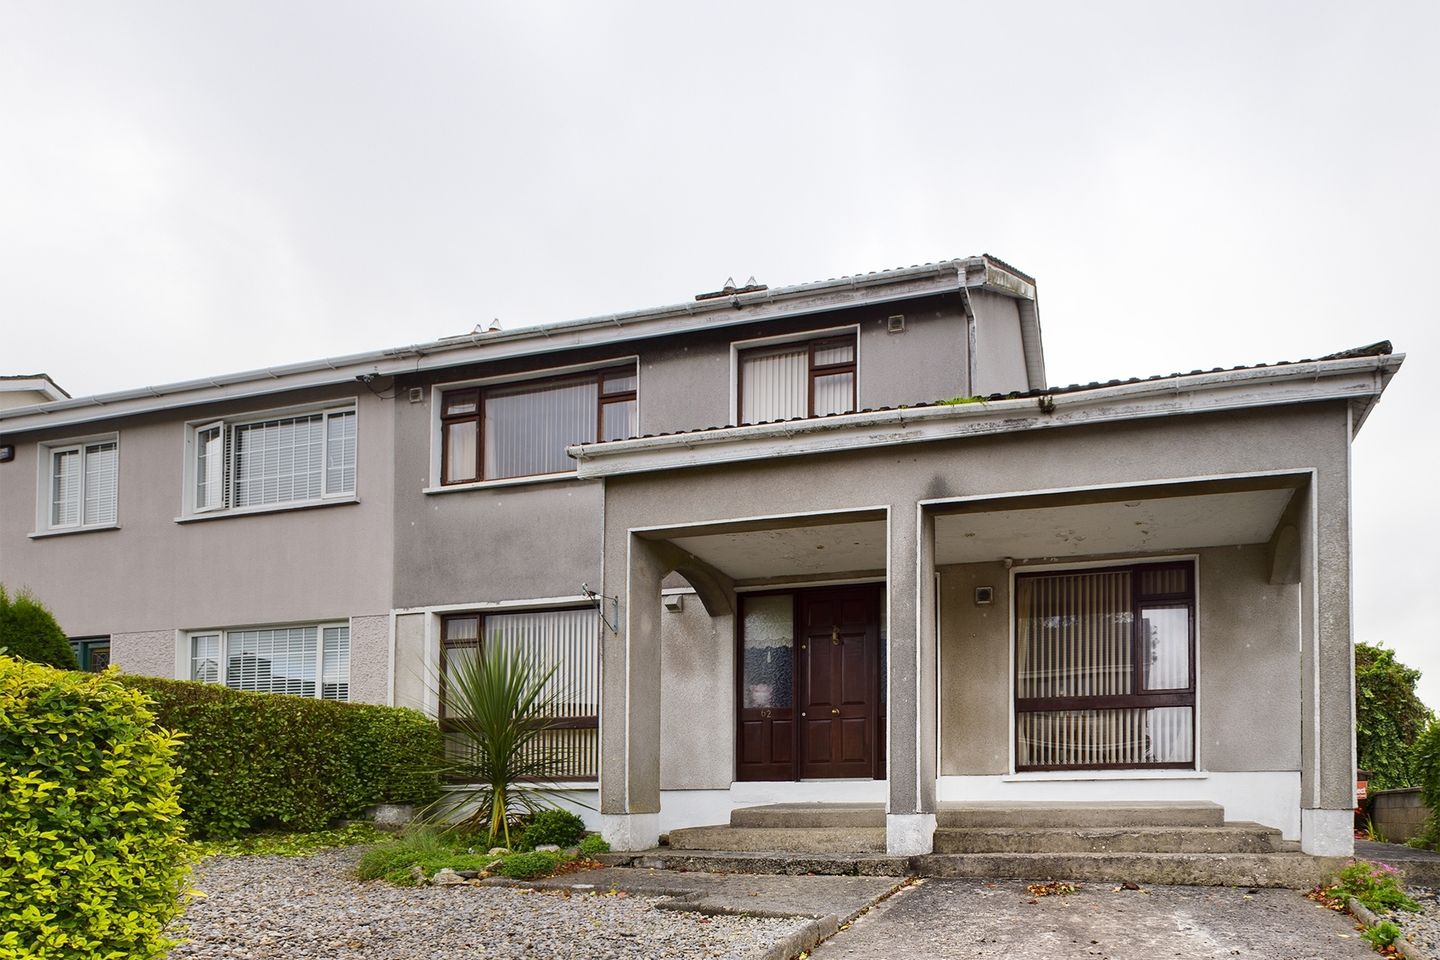 62 Grange Heights, Waterford City, Co. Waterford, X91H98P